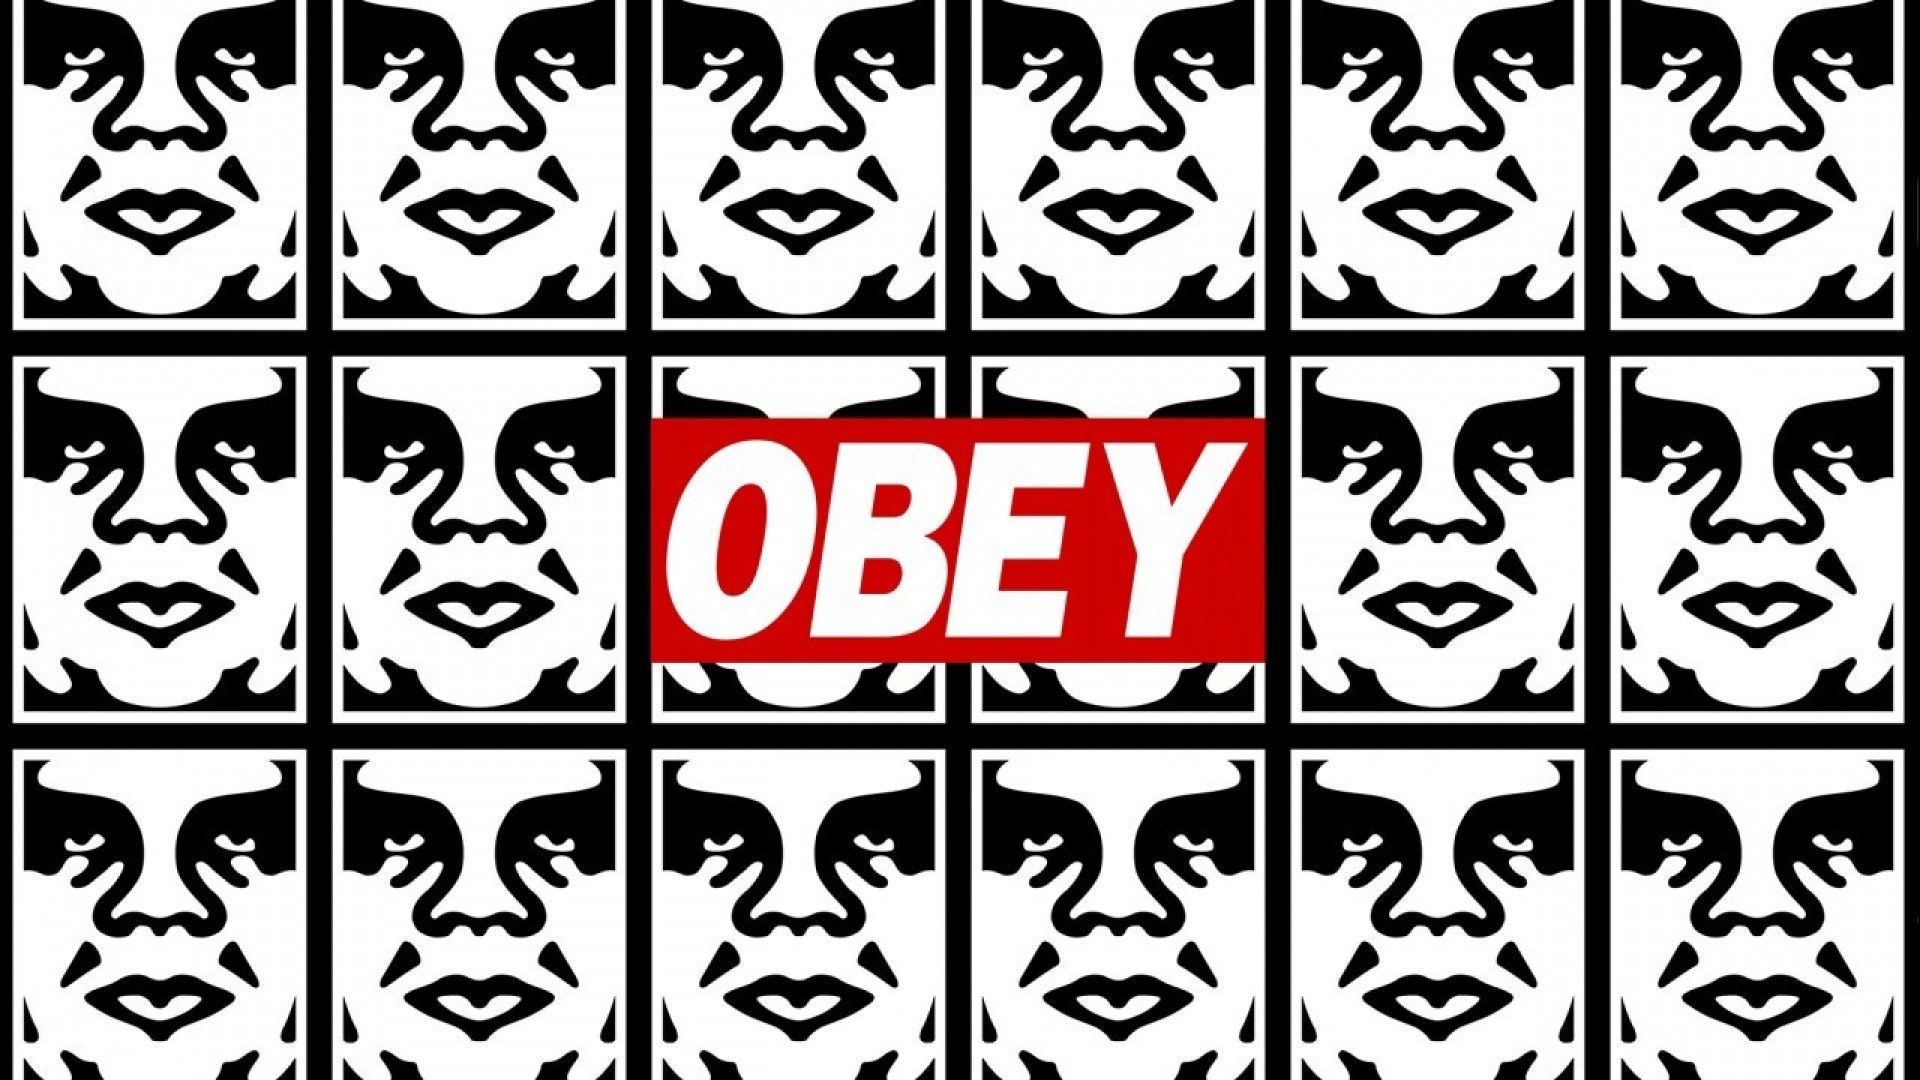 Obey Wallpapers